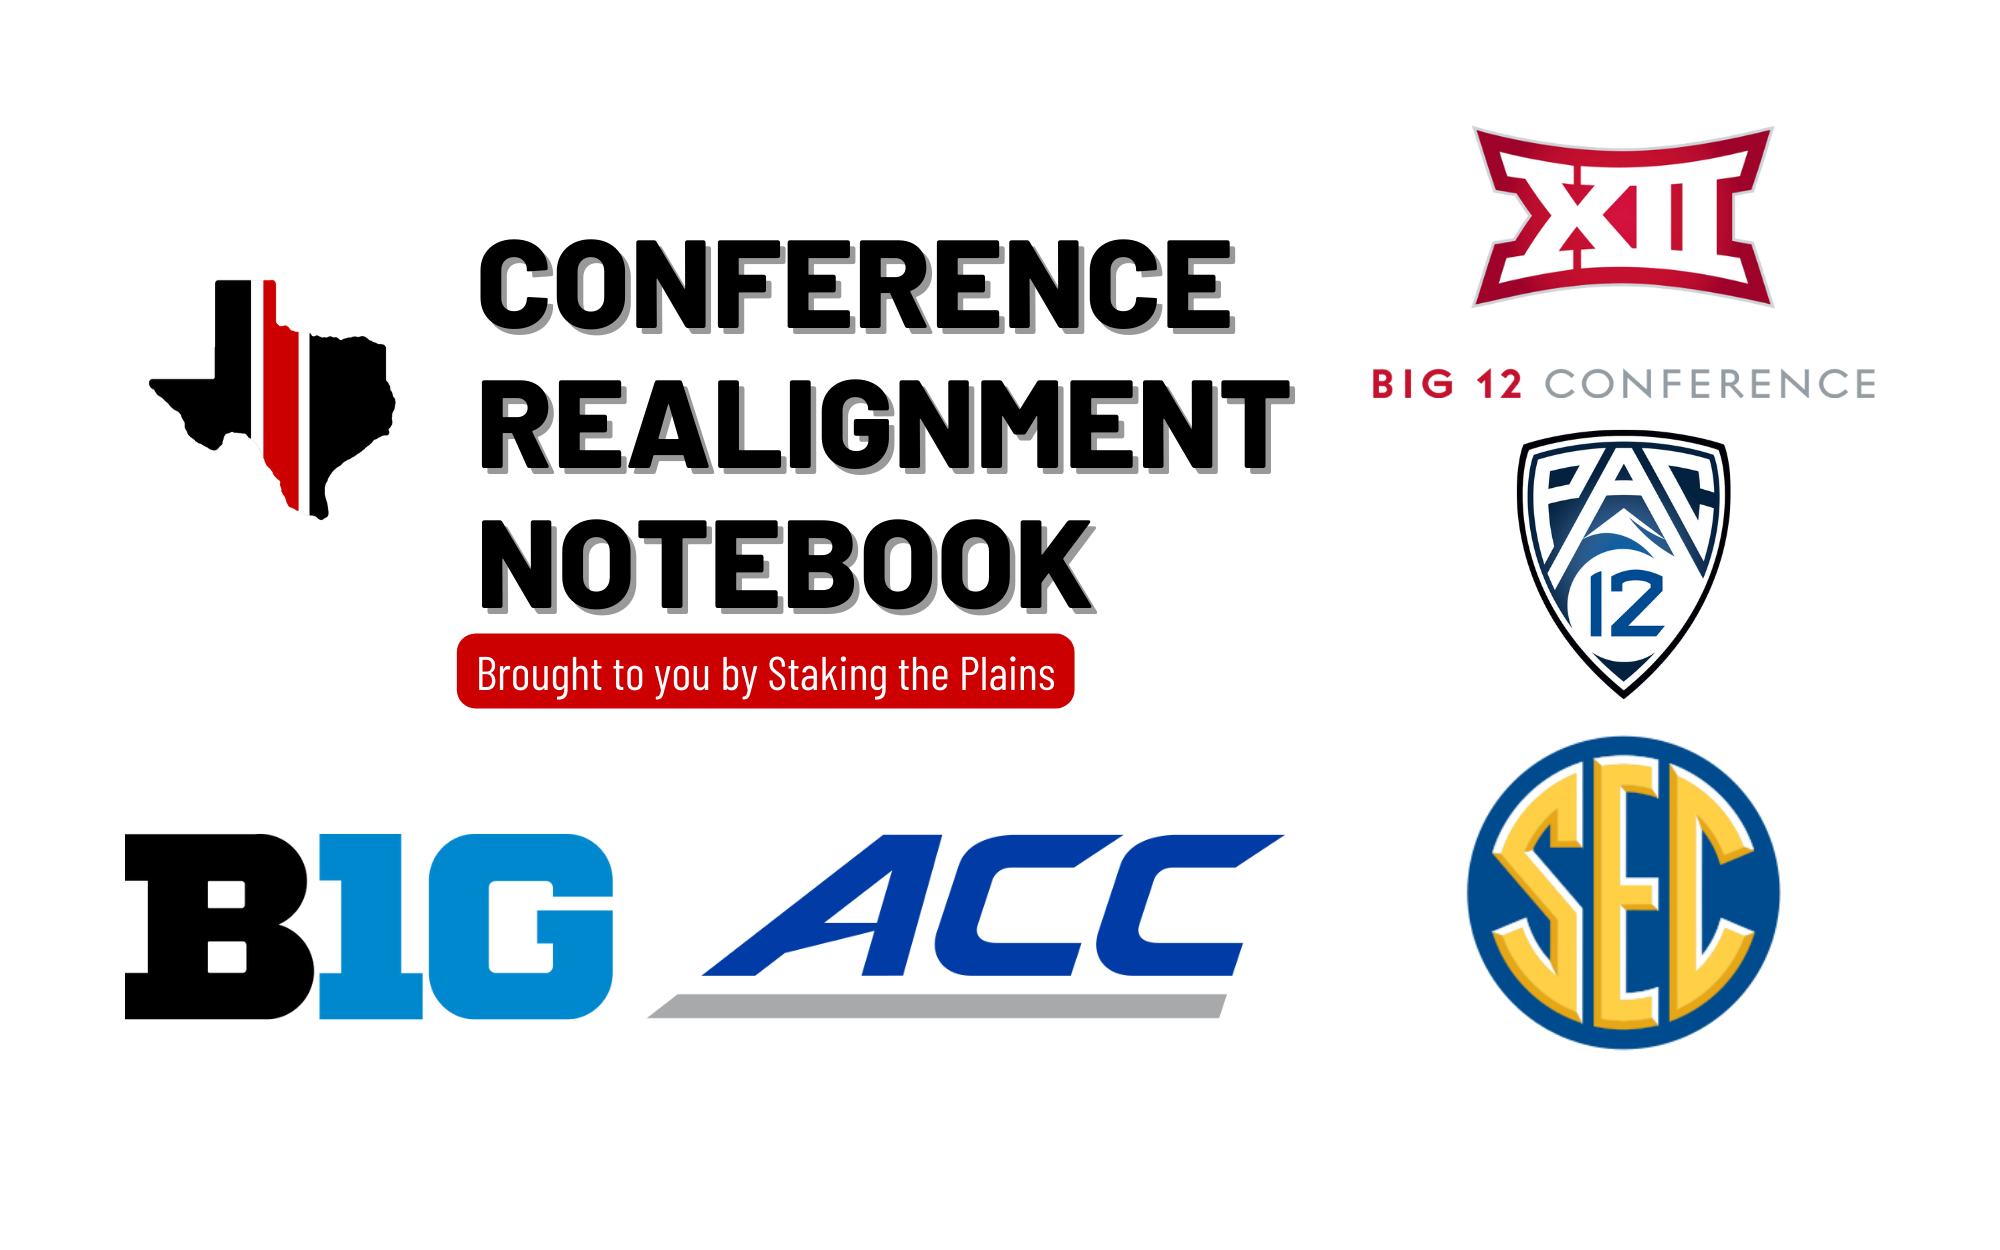 Conference Realignment Notebook: Report that Big 12 in Deep Discussions to Add 6 Pac-12 Teams